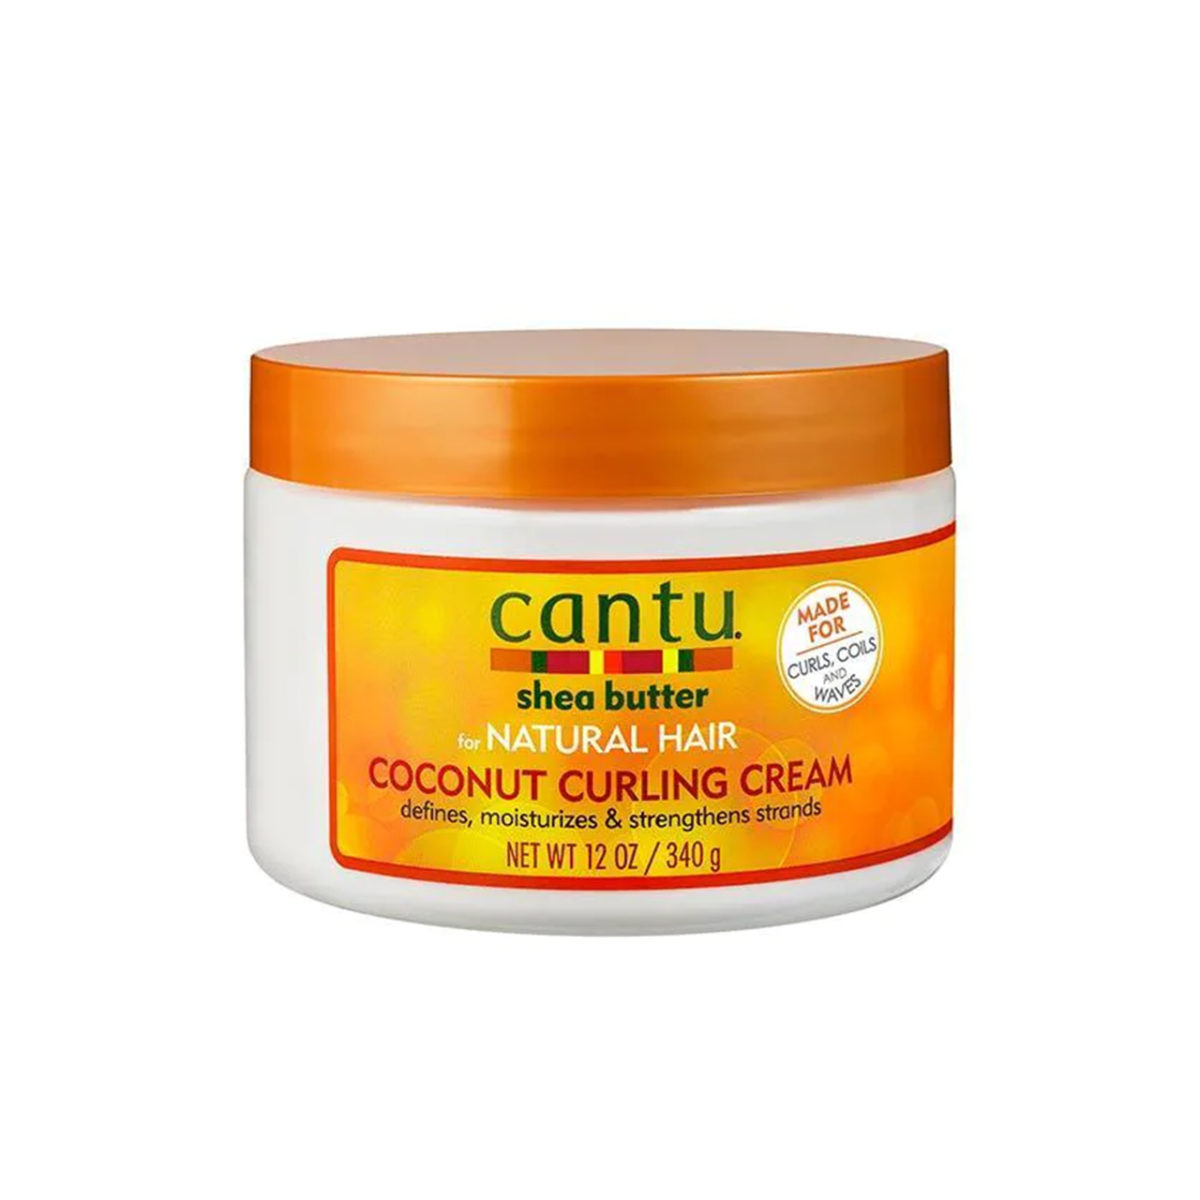 Cantu - Coconut Curling Cream Ohmykajo curly hair care, hair loss treatment, curly hair products Cantu - Coconut Curling Cream